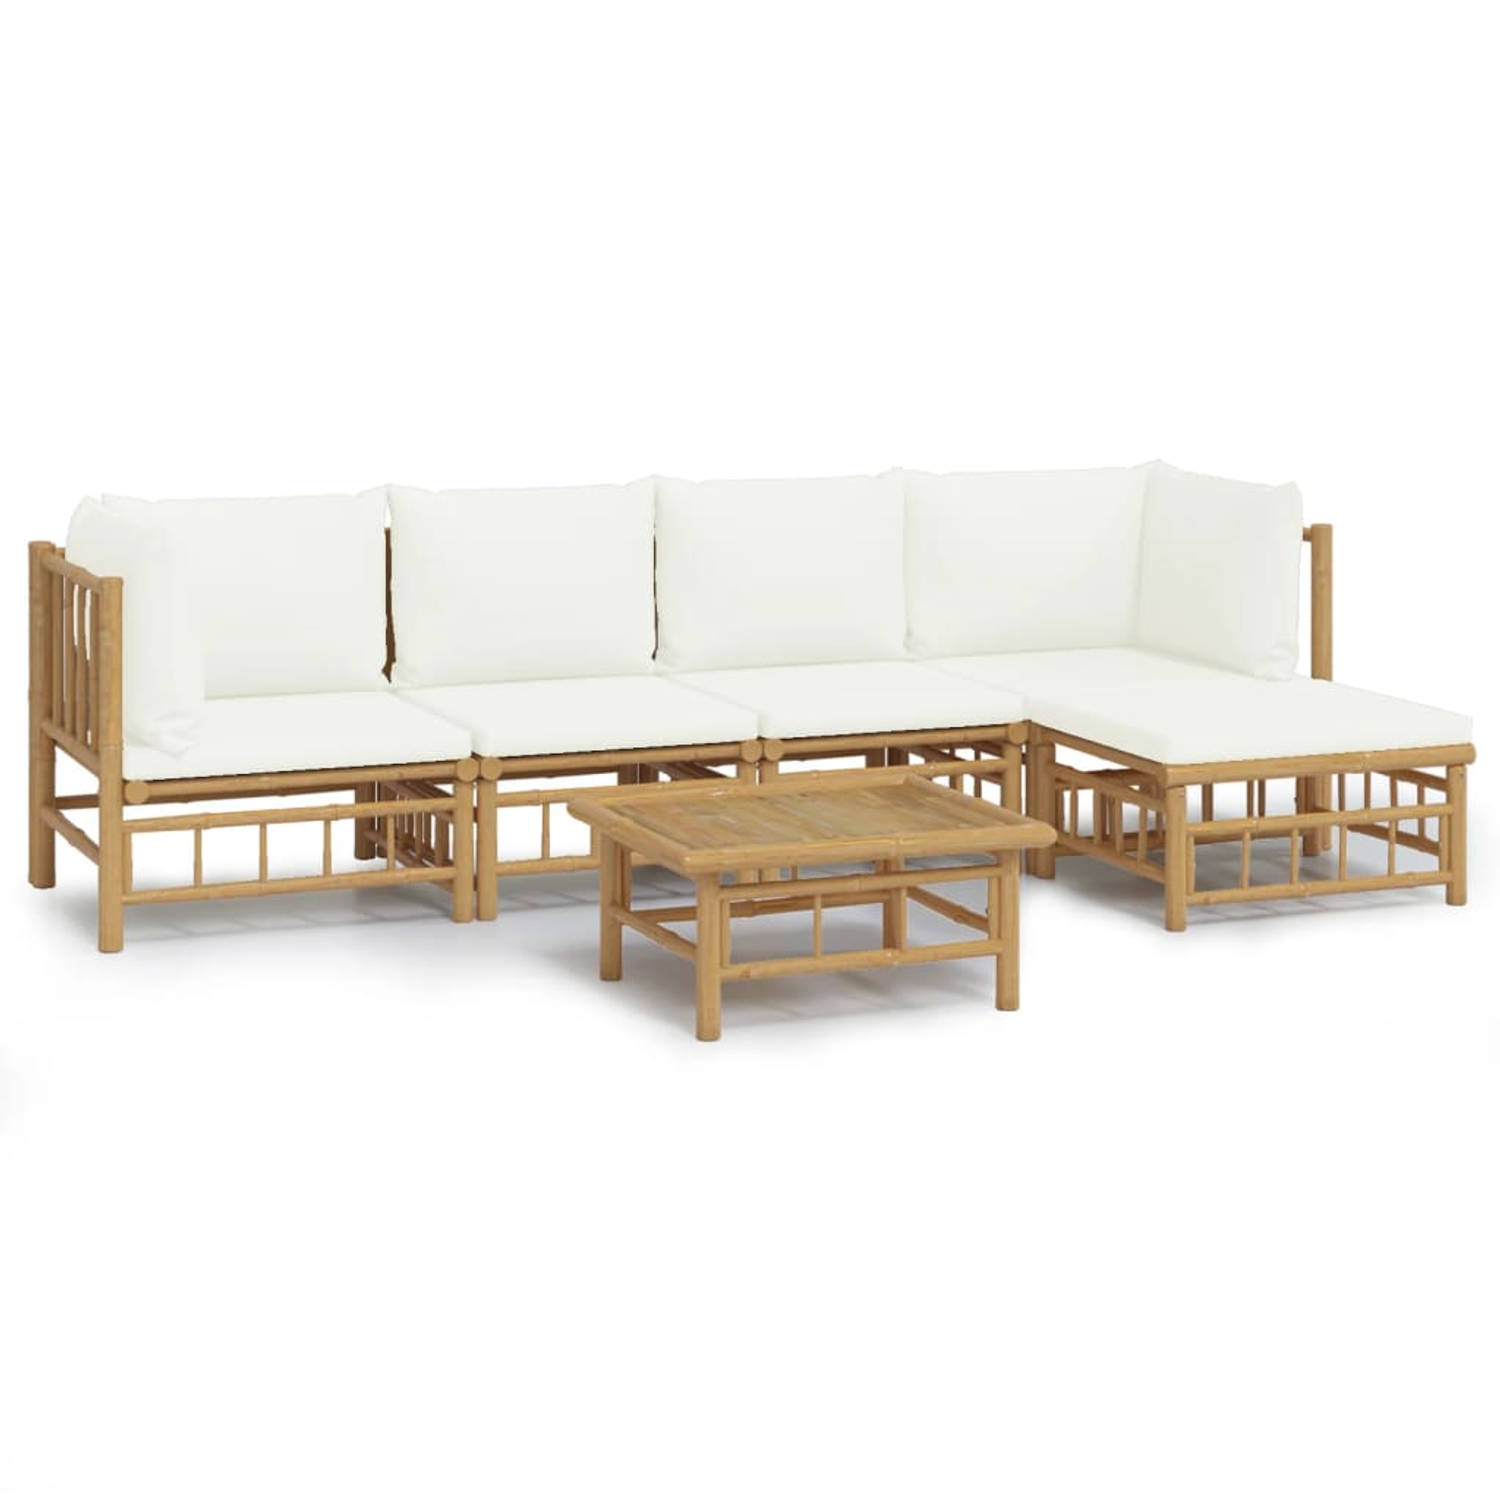 The Living Store 6-delige Loungeset met kussens bamboe crèmewit - Tuinset